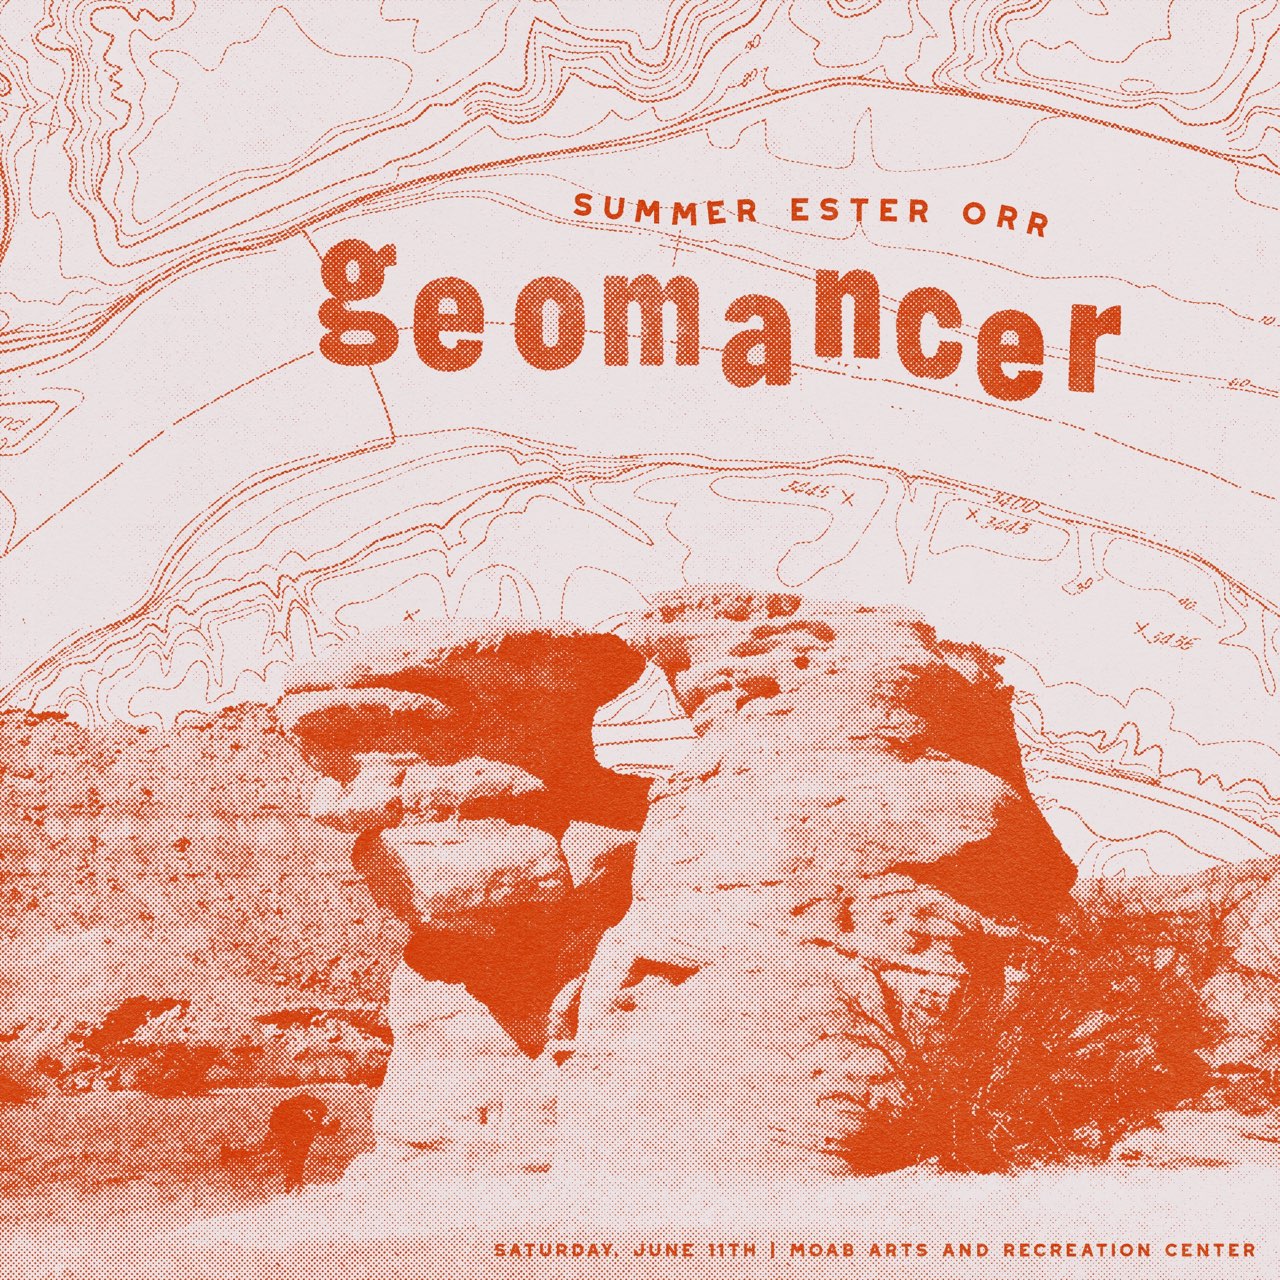 The title image of Orr's exhibit. The words "Summer Ester Orr: geomancer" are pictured on top of a collaged image of a topographic map and sandstone towers.